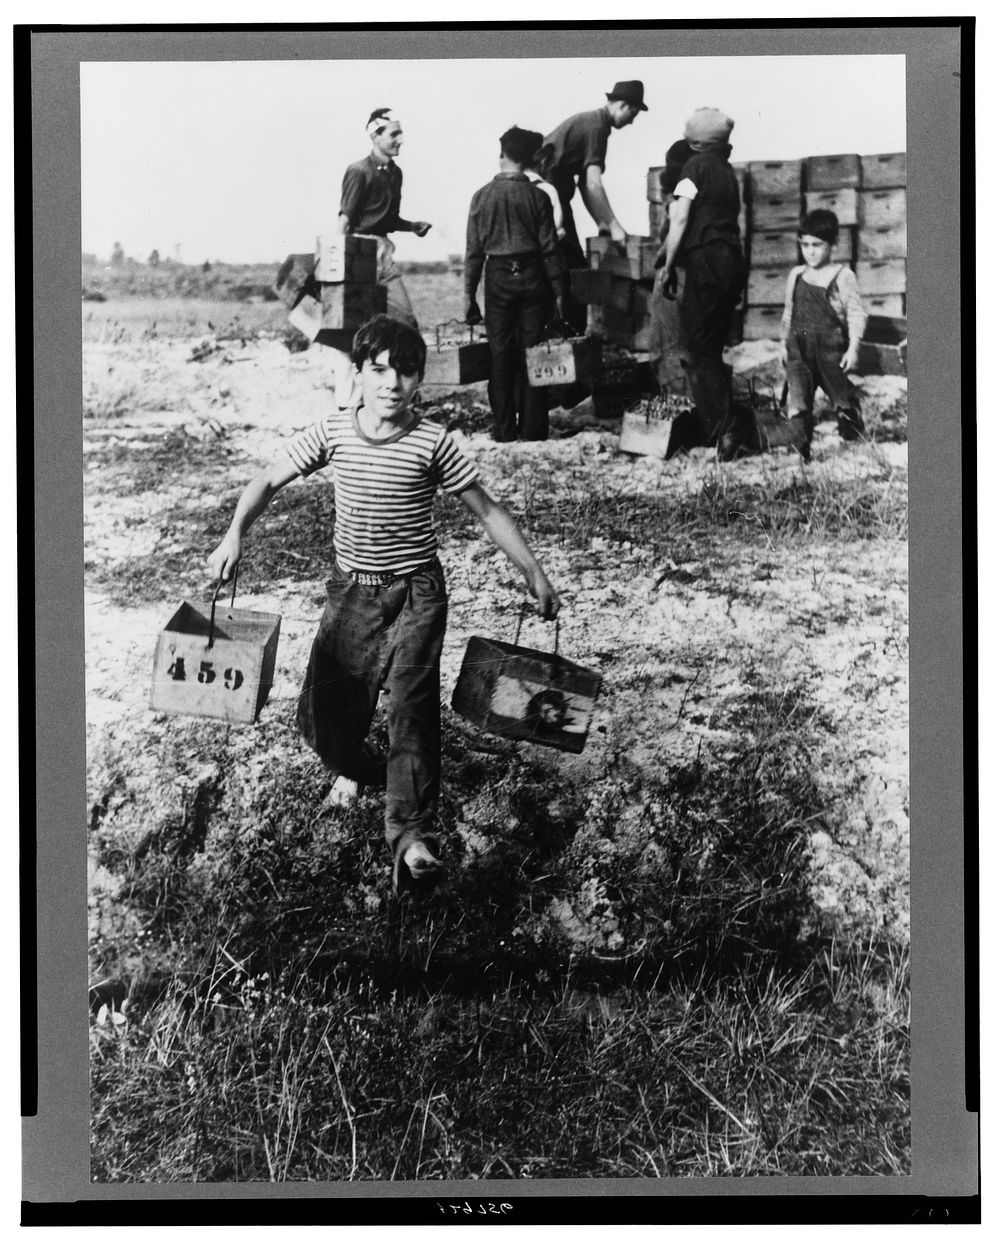 Boy leaving cranberry checking station at cranberry bog, Burlington County, New Jersey. Sourced from the Library of Congress.